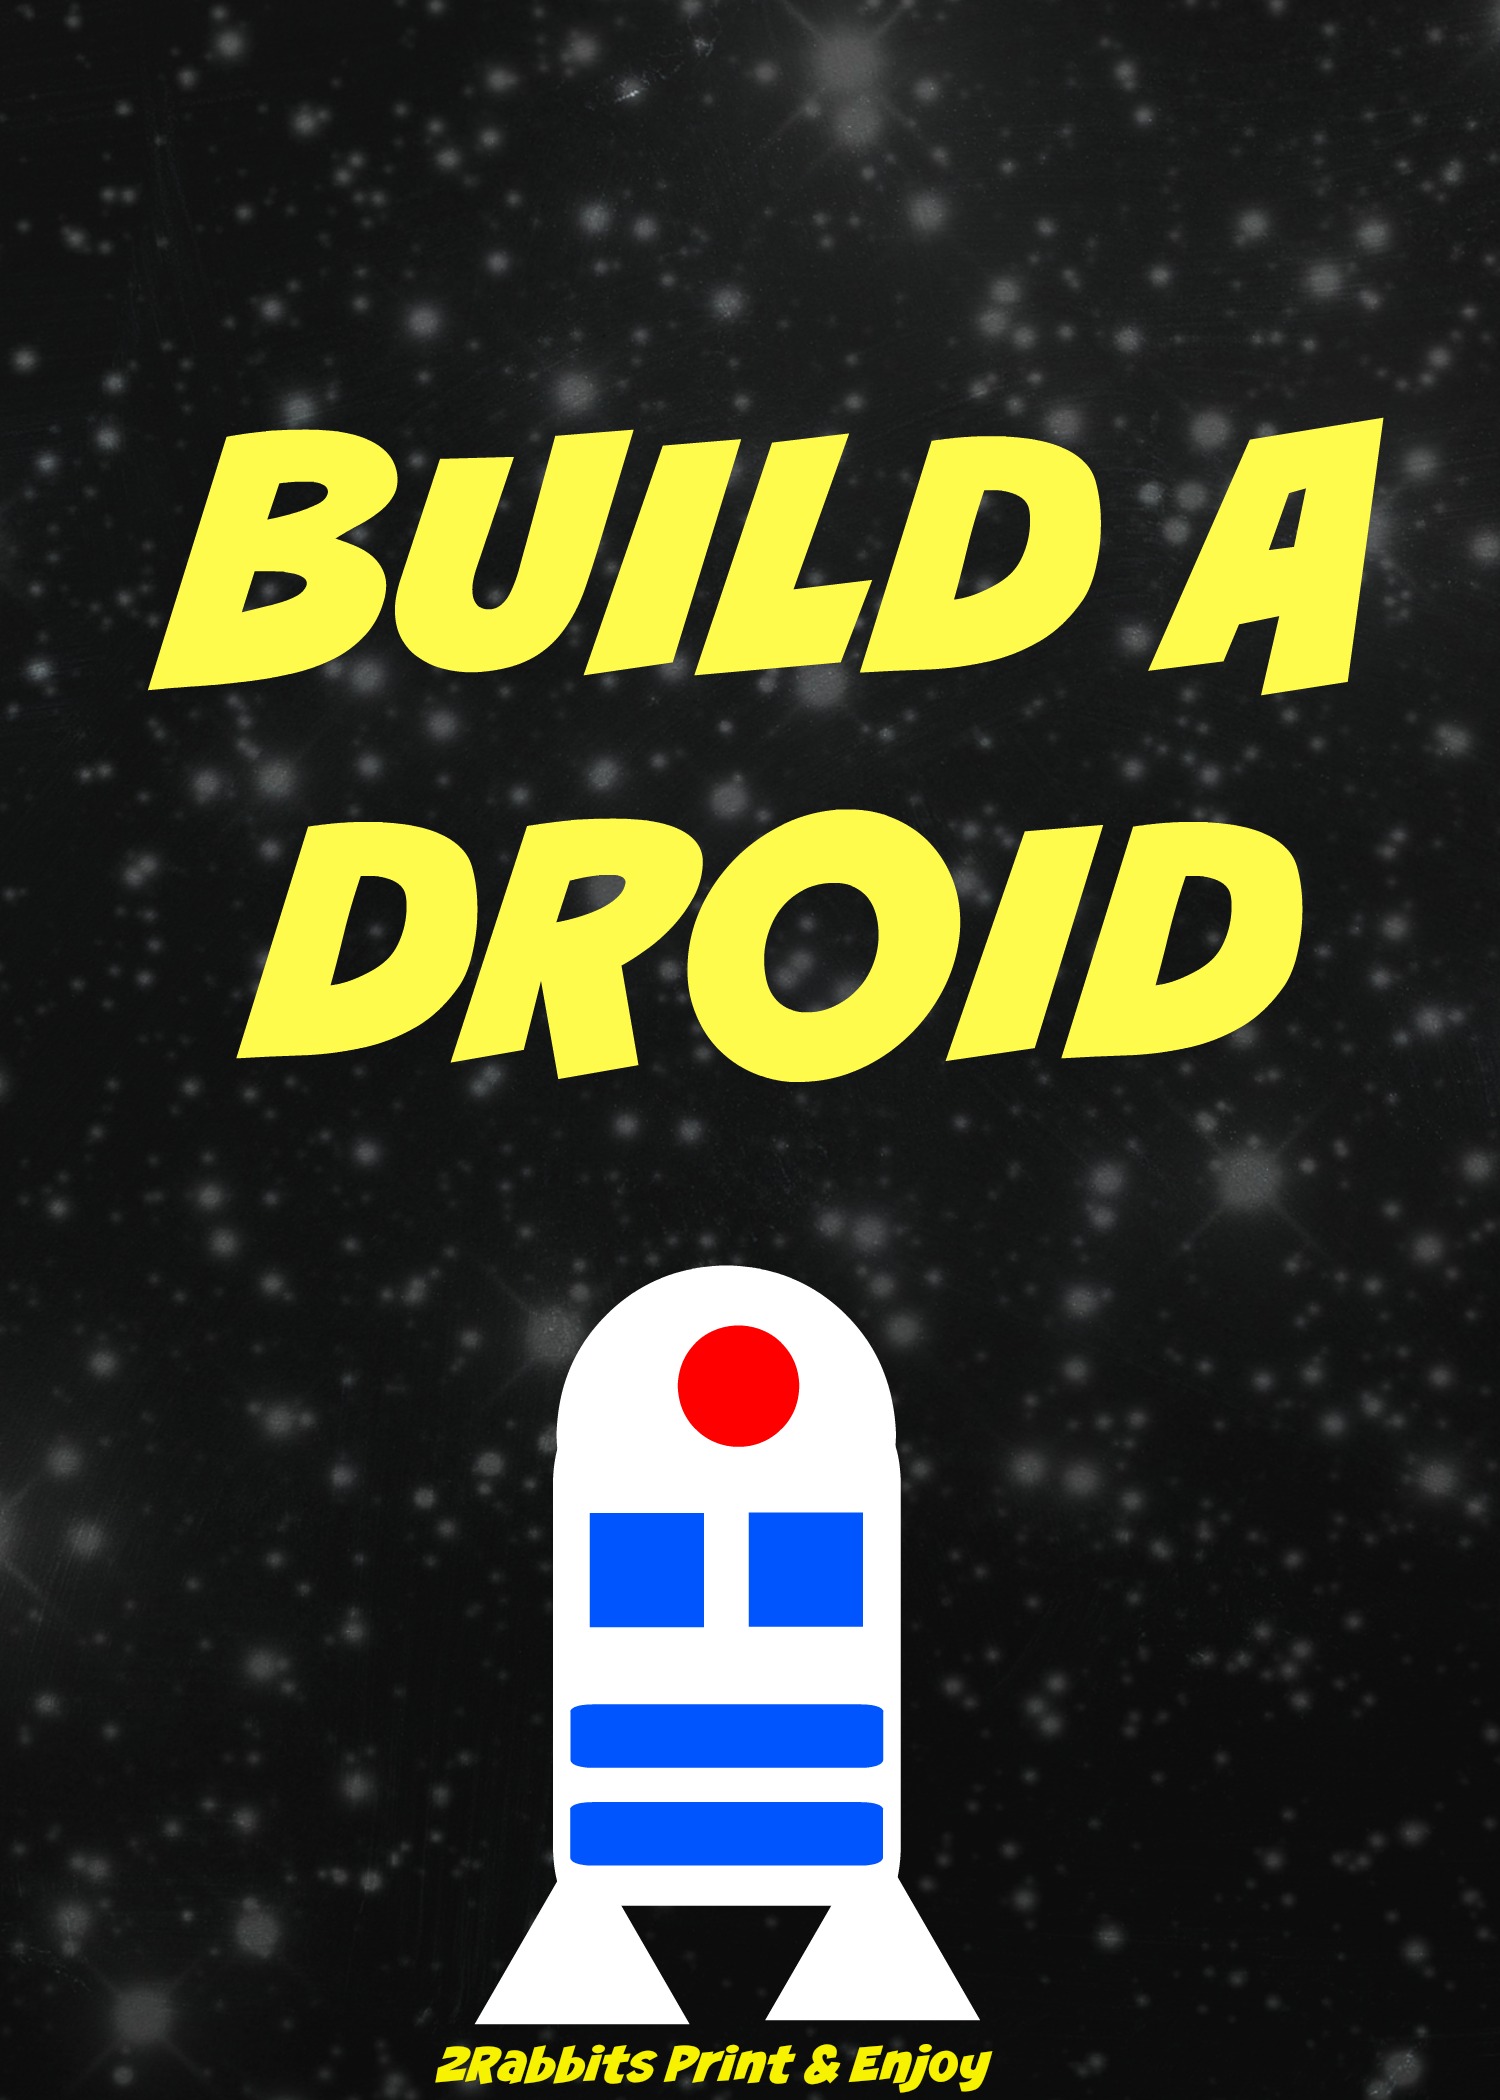 Free Printable Sign Star Wars Build a Droid